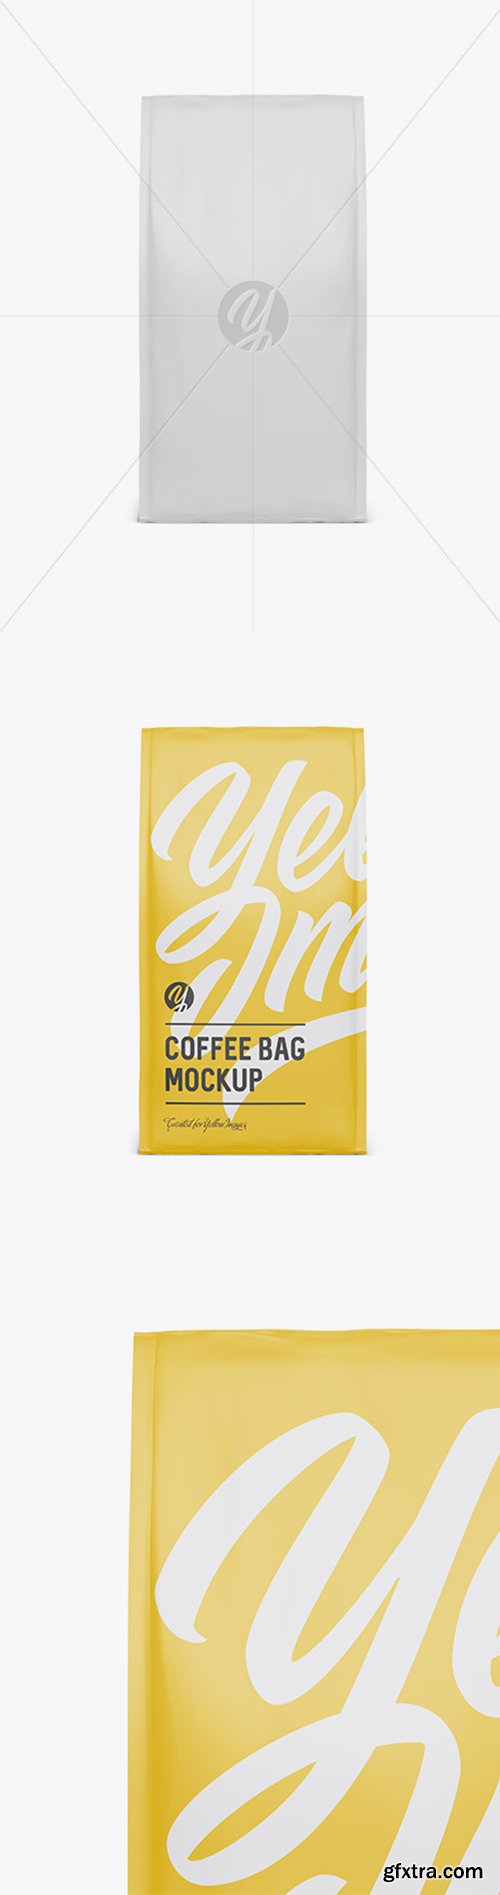 Matte Coffee Bag Mockup - Front View 23770